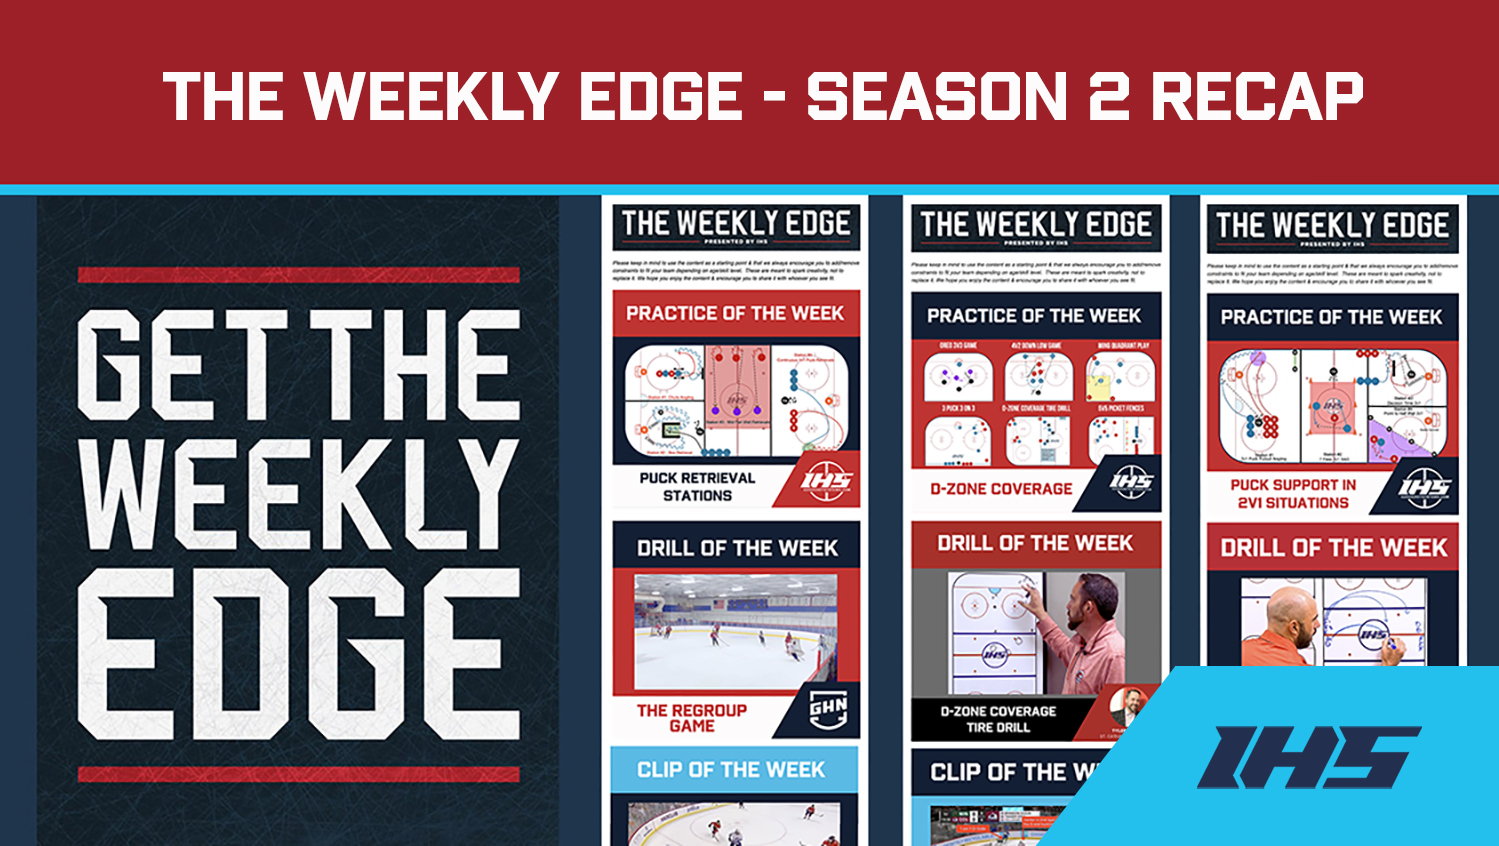 The Weekly Edge Season 2 Recap: 19 Editions of Practices, Drills, Clips & More